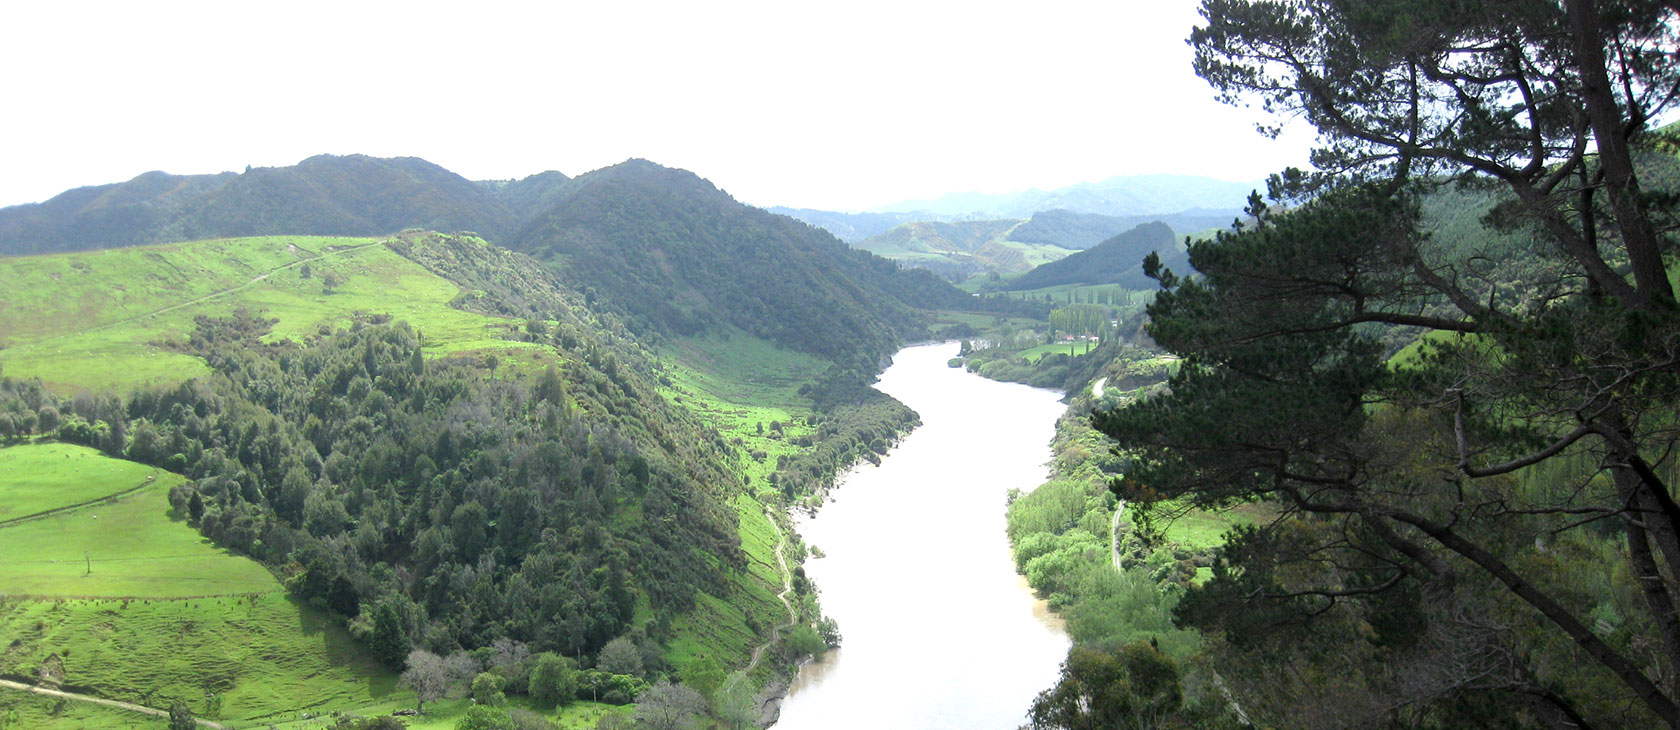 Looking down the verdant Whanganui River in New Zealand